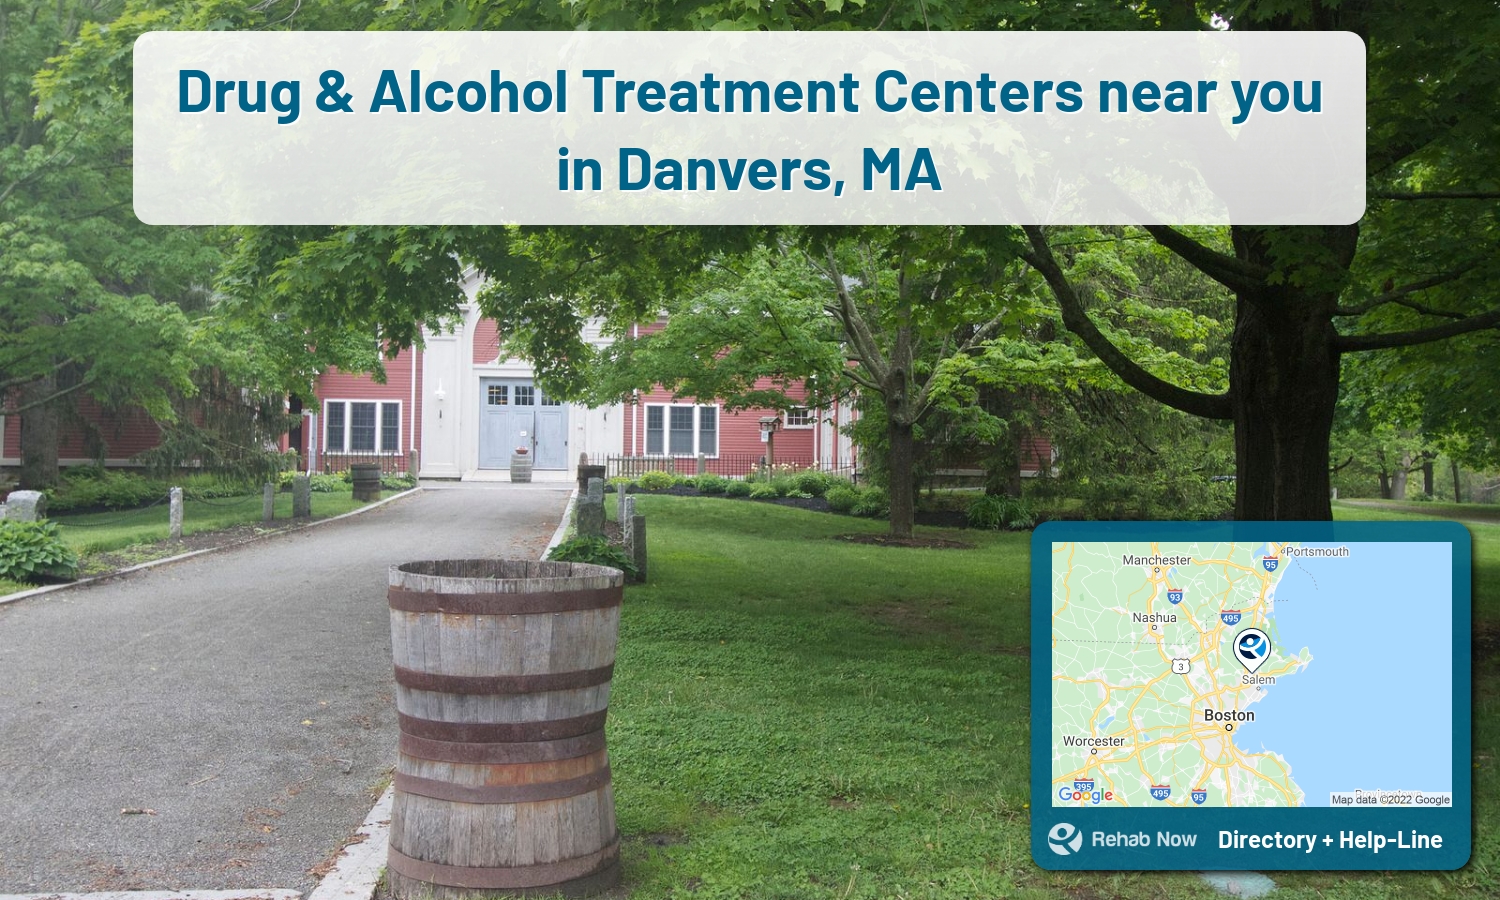 Danvers, MA Treatment Centers. Find drug rehab in Danvers, Massachusetts, or detox and treatment programs. Get the right help now!